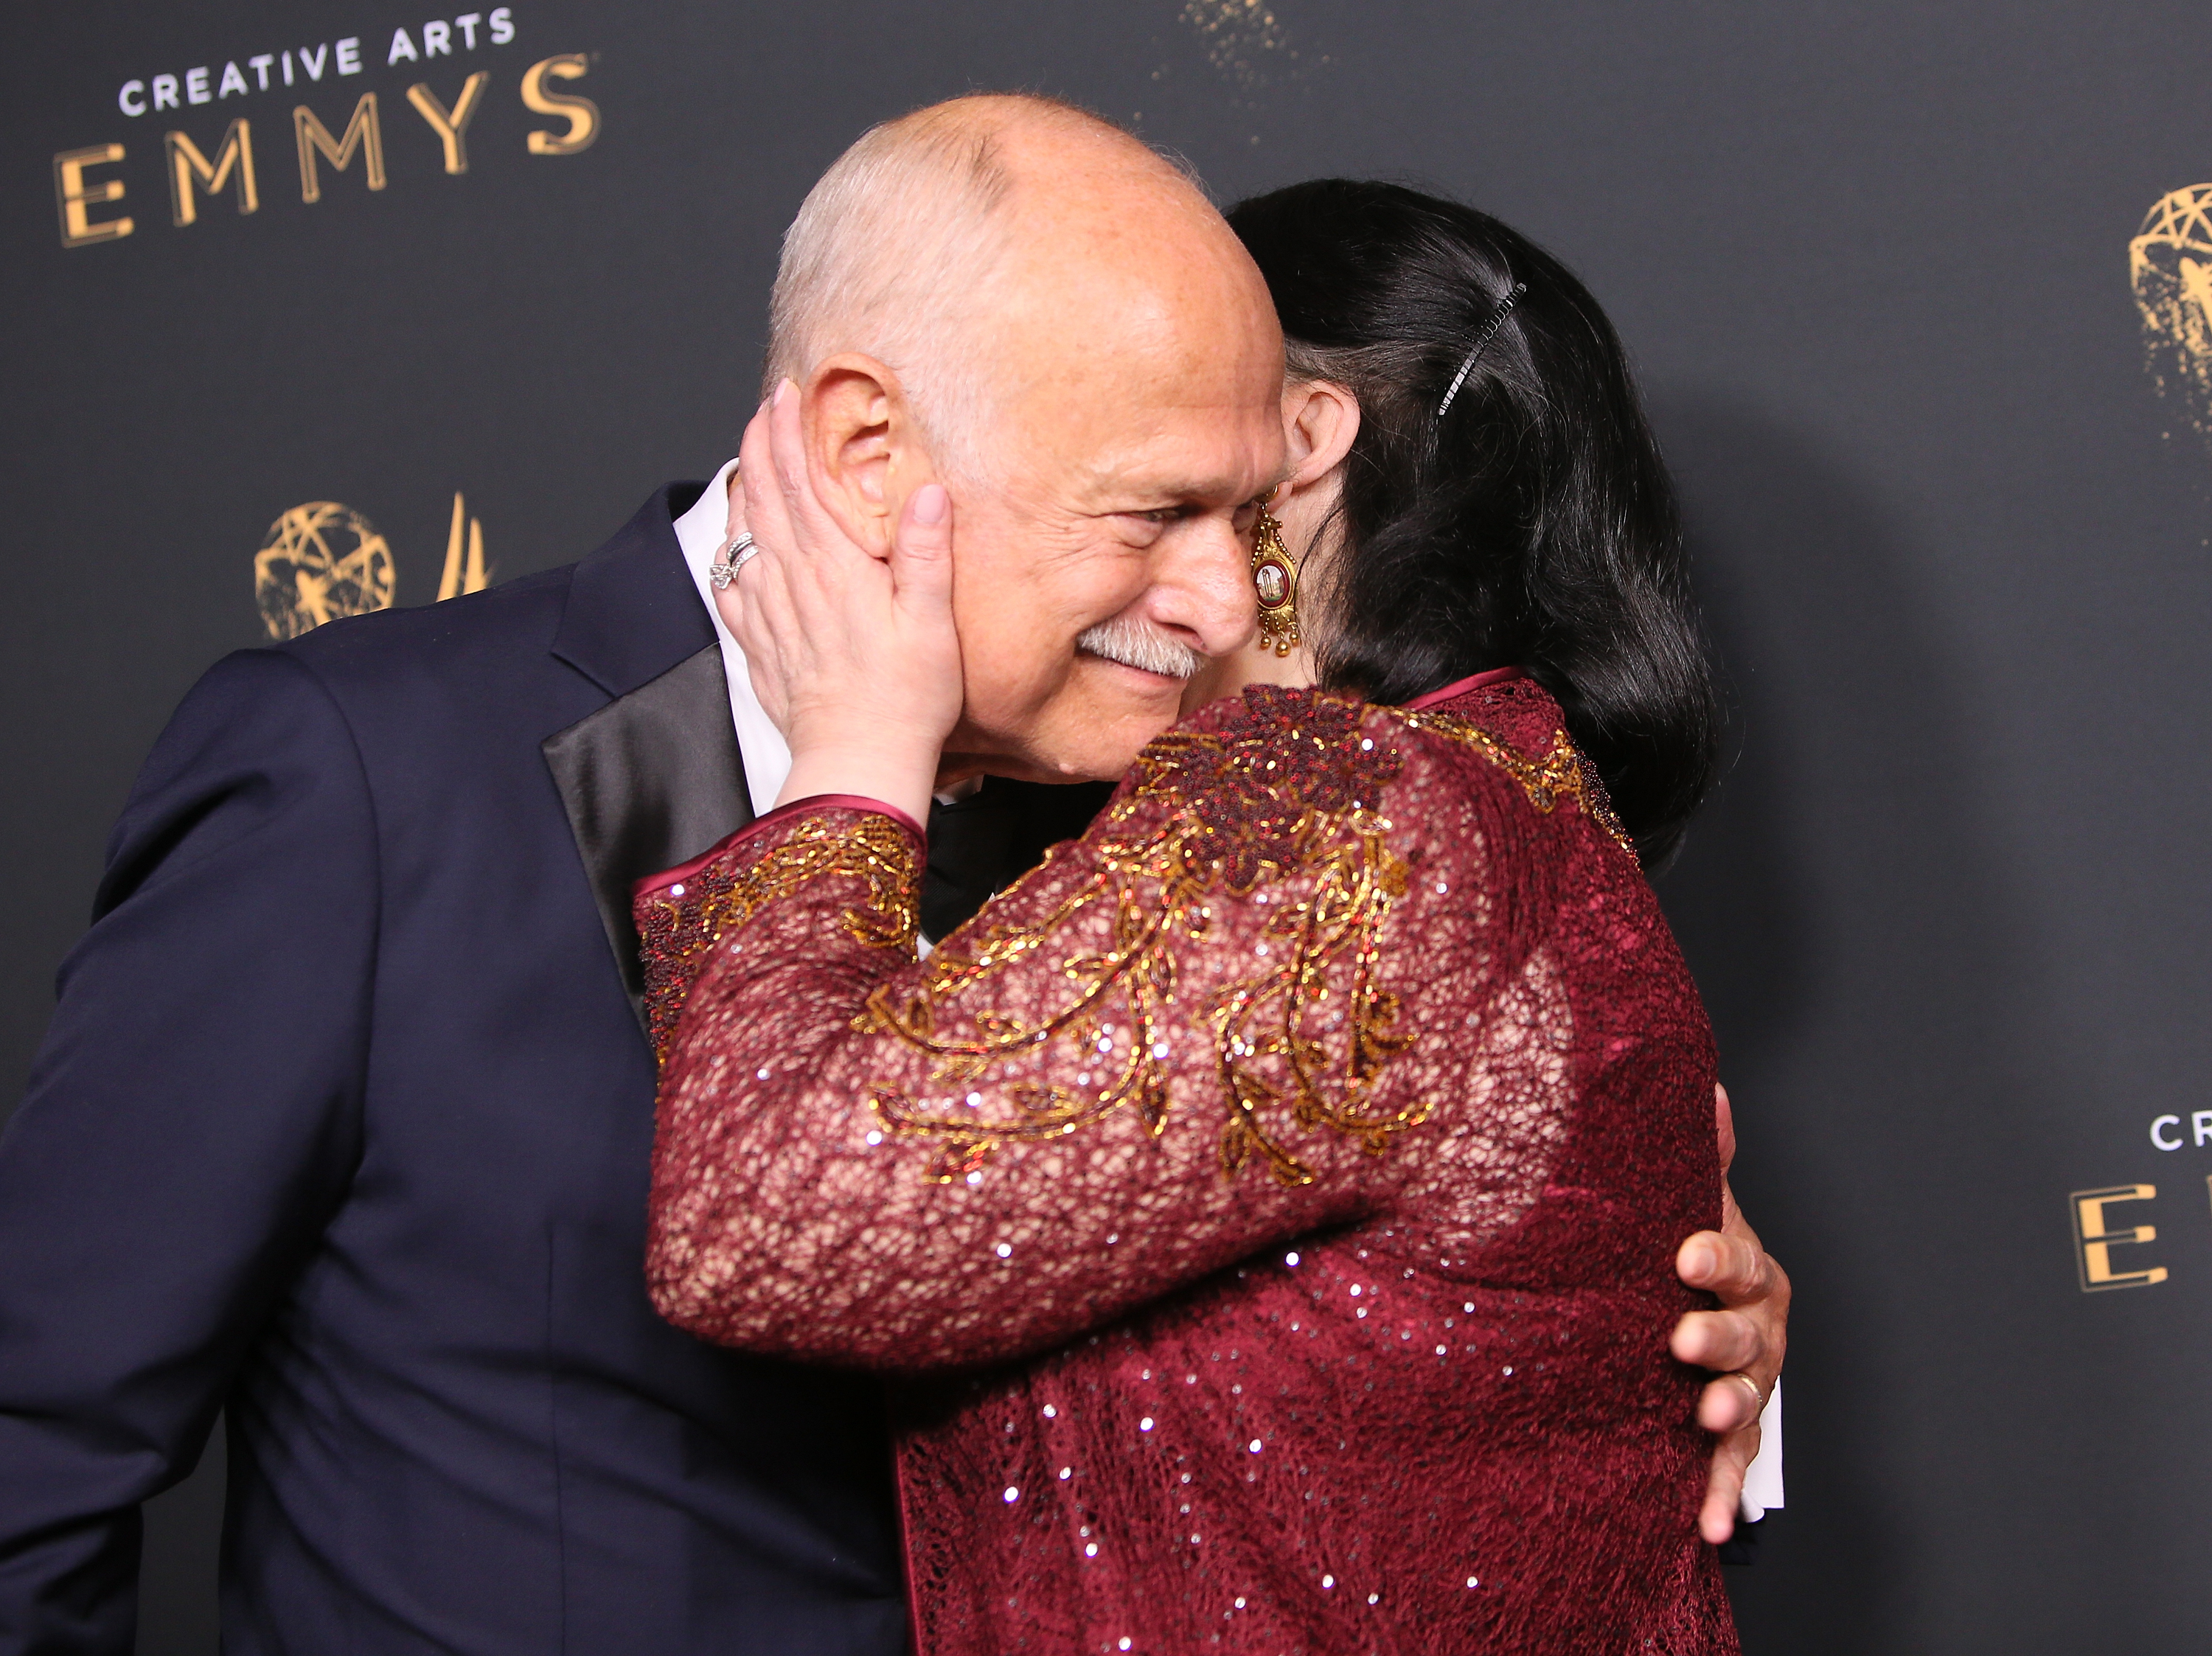 Gerald McRaney and Delta Burke at the at the 2017 Creative Arts Emmy Awards at Microsoft Theater on September 10, 2017 in Los Angeles, California | Source: Getty Images